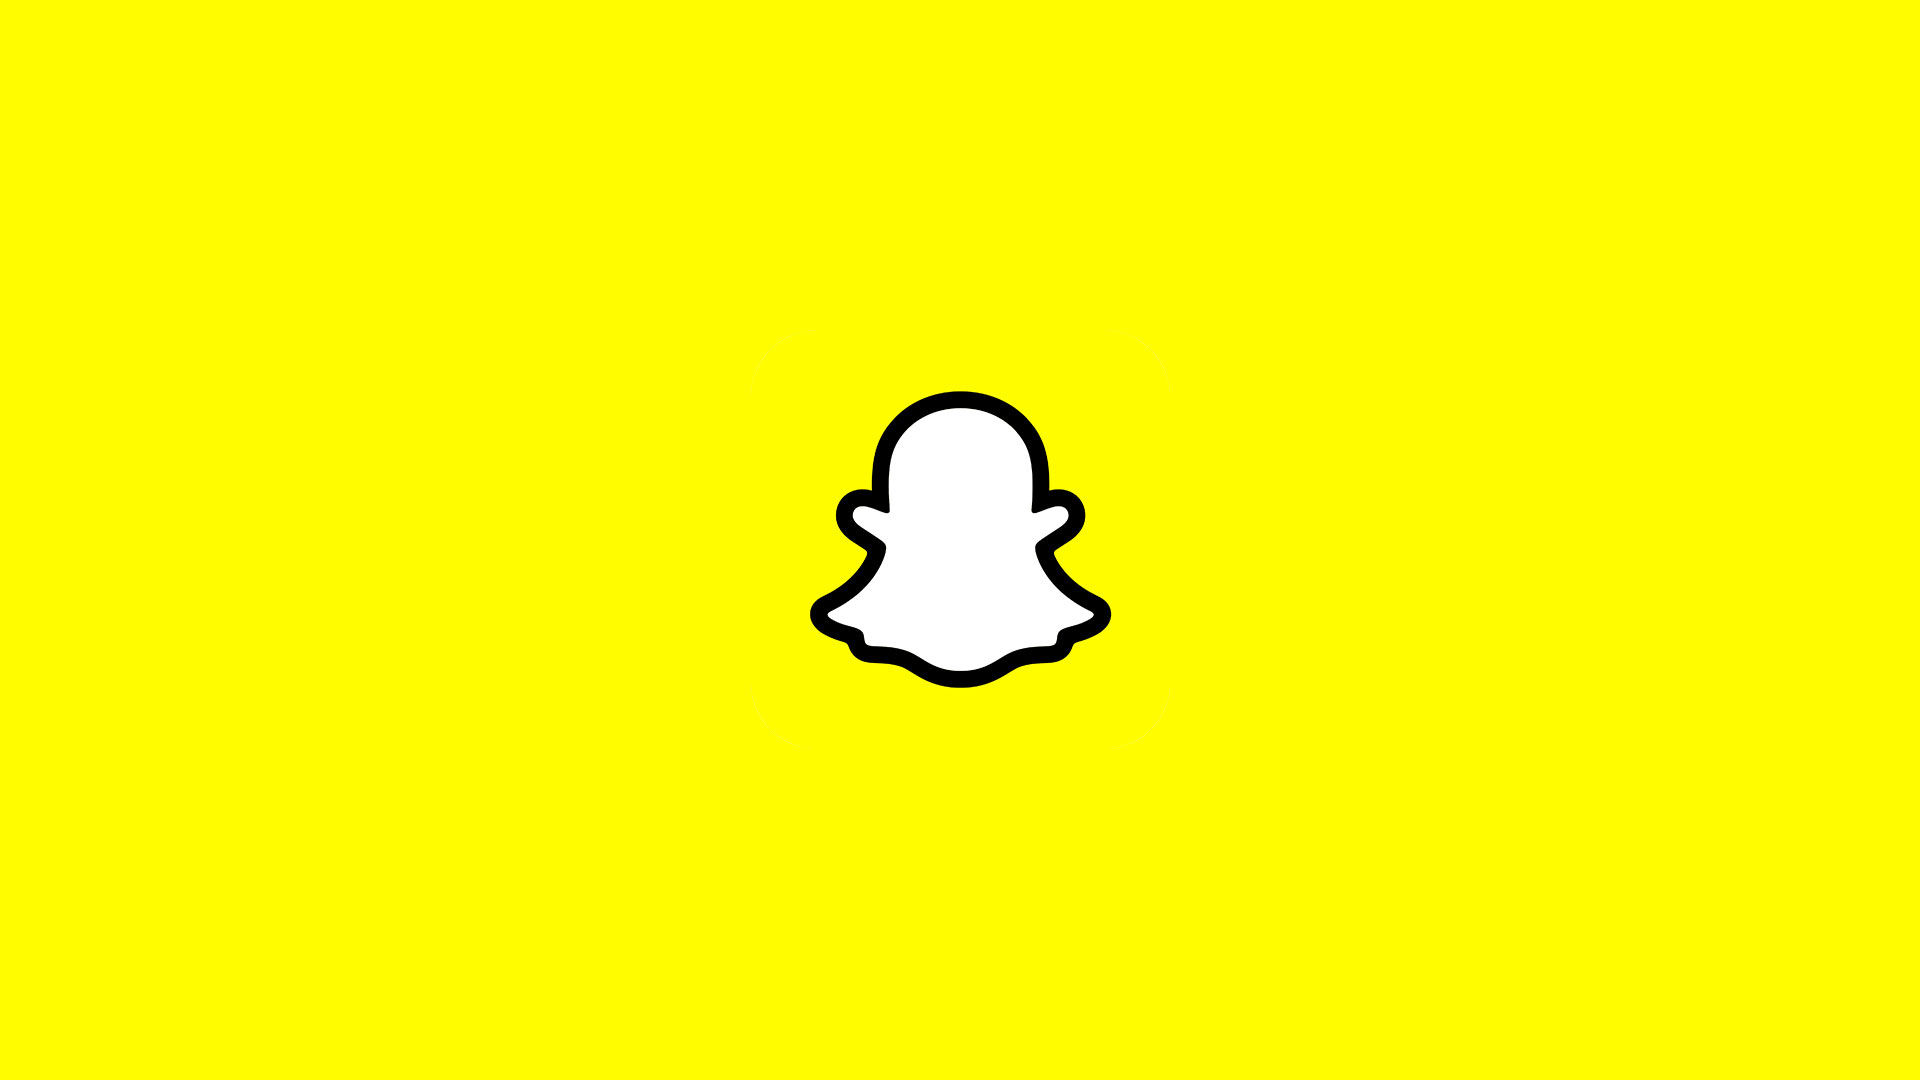 How to See Memories on Snapchat